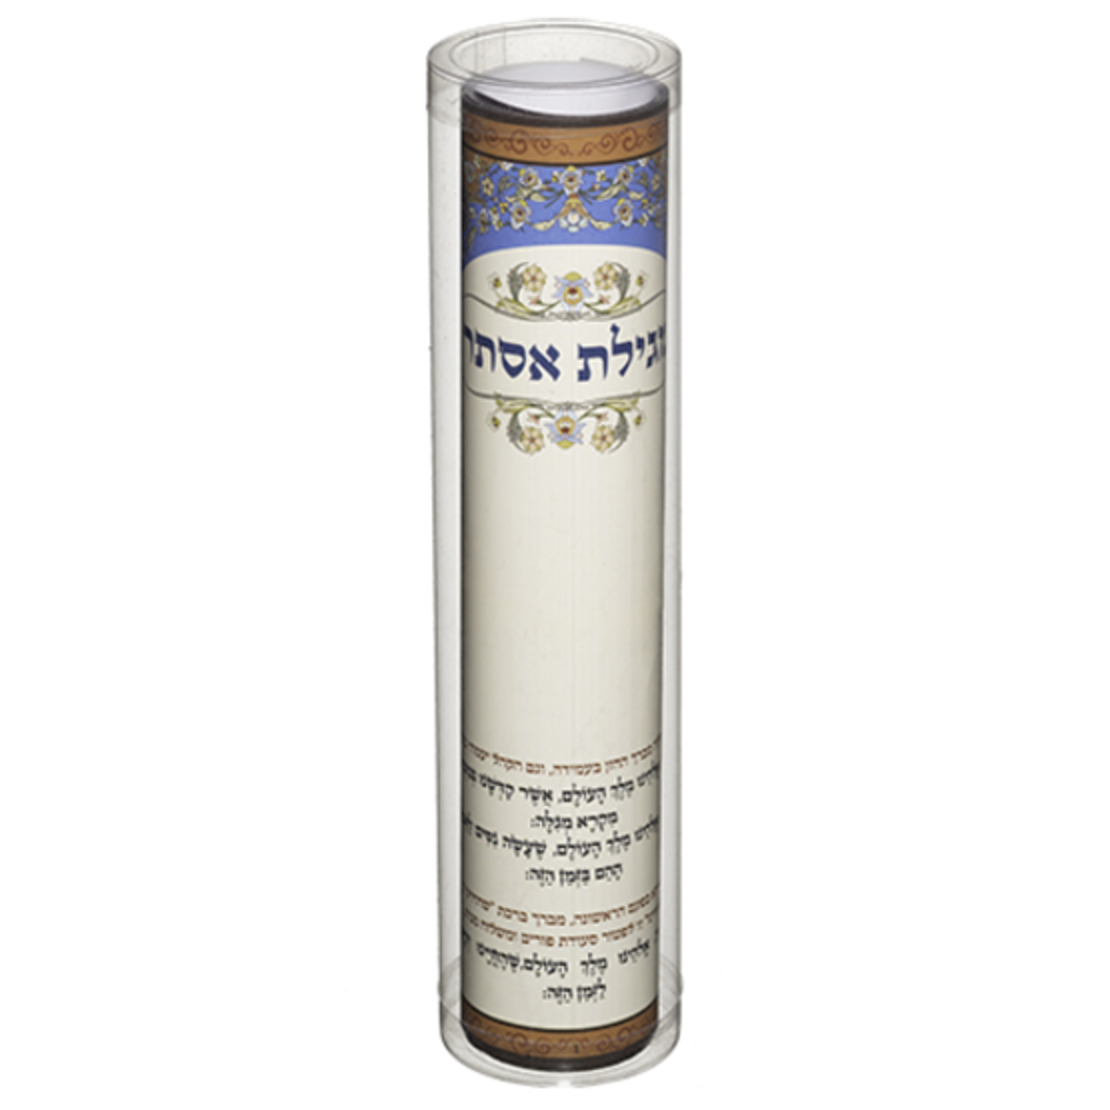 The Book of Esther in a PVC container